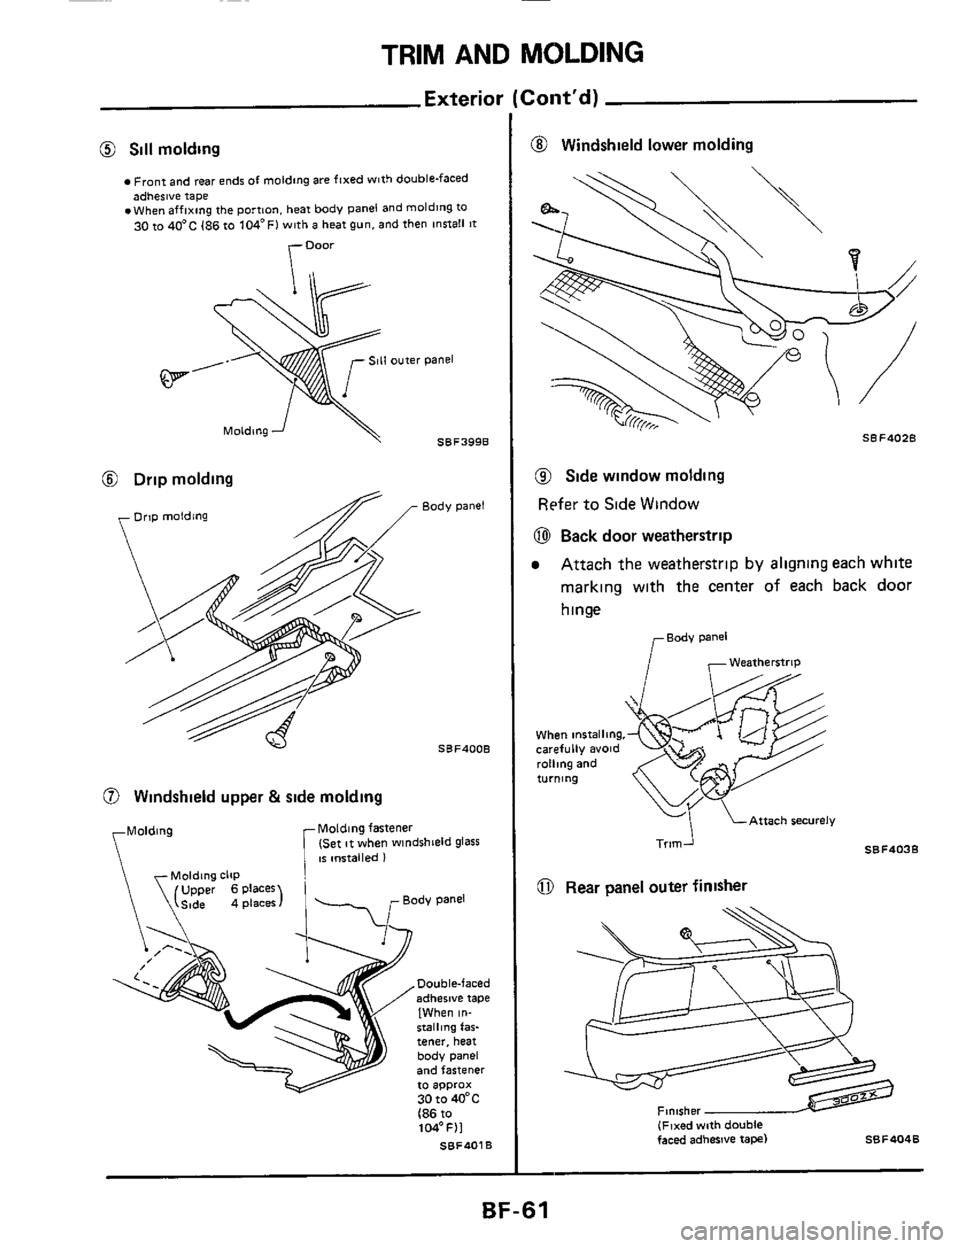 NISSAN 300ZX 1984 Z31 Body Repair Manual TRIM AND MOLDING 
Exterioi 
@ Sill molding 
Front  and rear  ends  of molding  are fixed  with double-faced 
.When  affixing  the portion,  heat body  panel  and moldlng 
to adhesive  tape 
30 to 40C